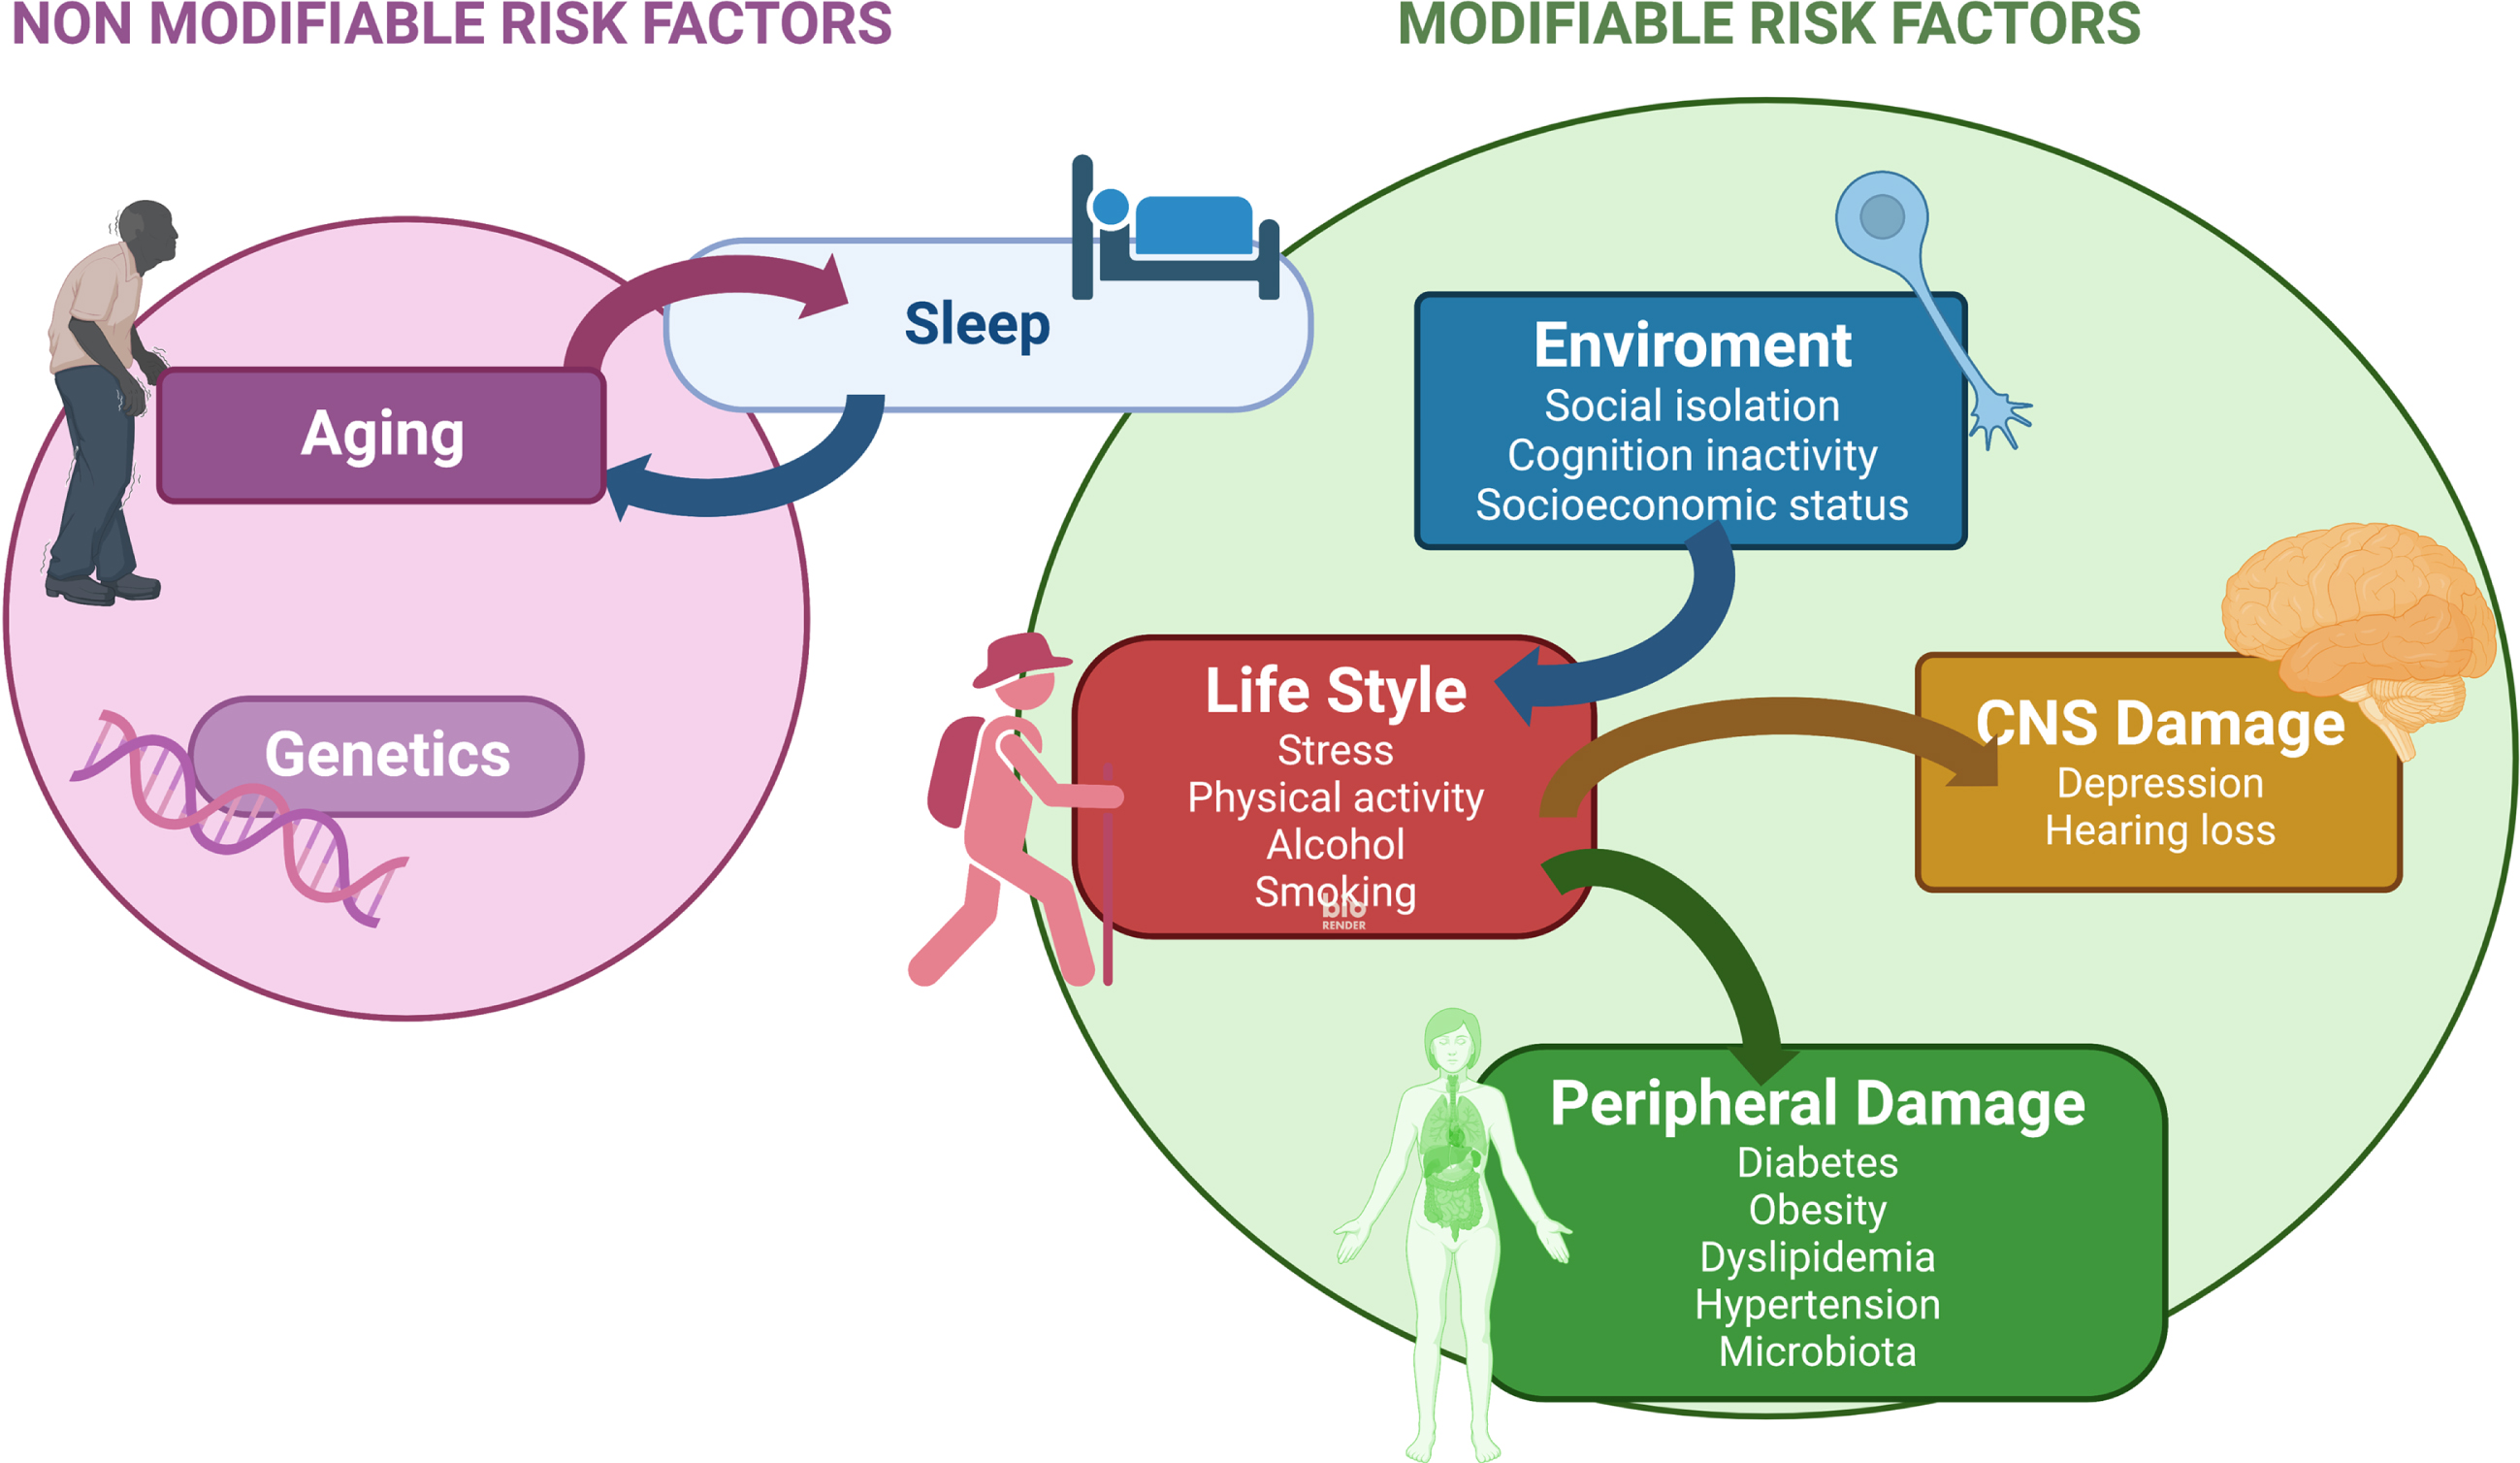 Modifiable risk factors-Kinetics and links between them. Sleep disturbance is related to increasing age and it could be one of the earlier modifiable risk factors for AD (see text). Other modifiable risk factors related to the environment, lifestyle, or damage to the nervous system, peripheral tissues or organs are indicated. Arrows show the links between these modifiable risk factors.